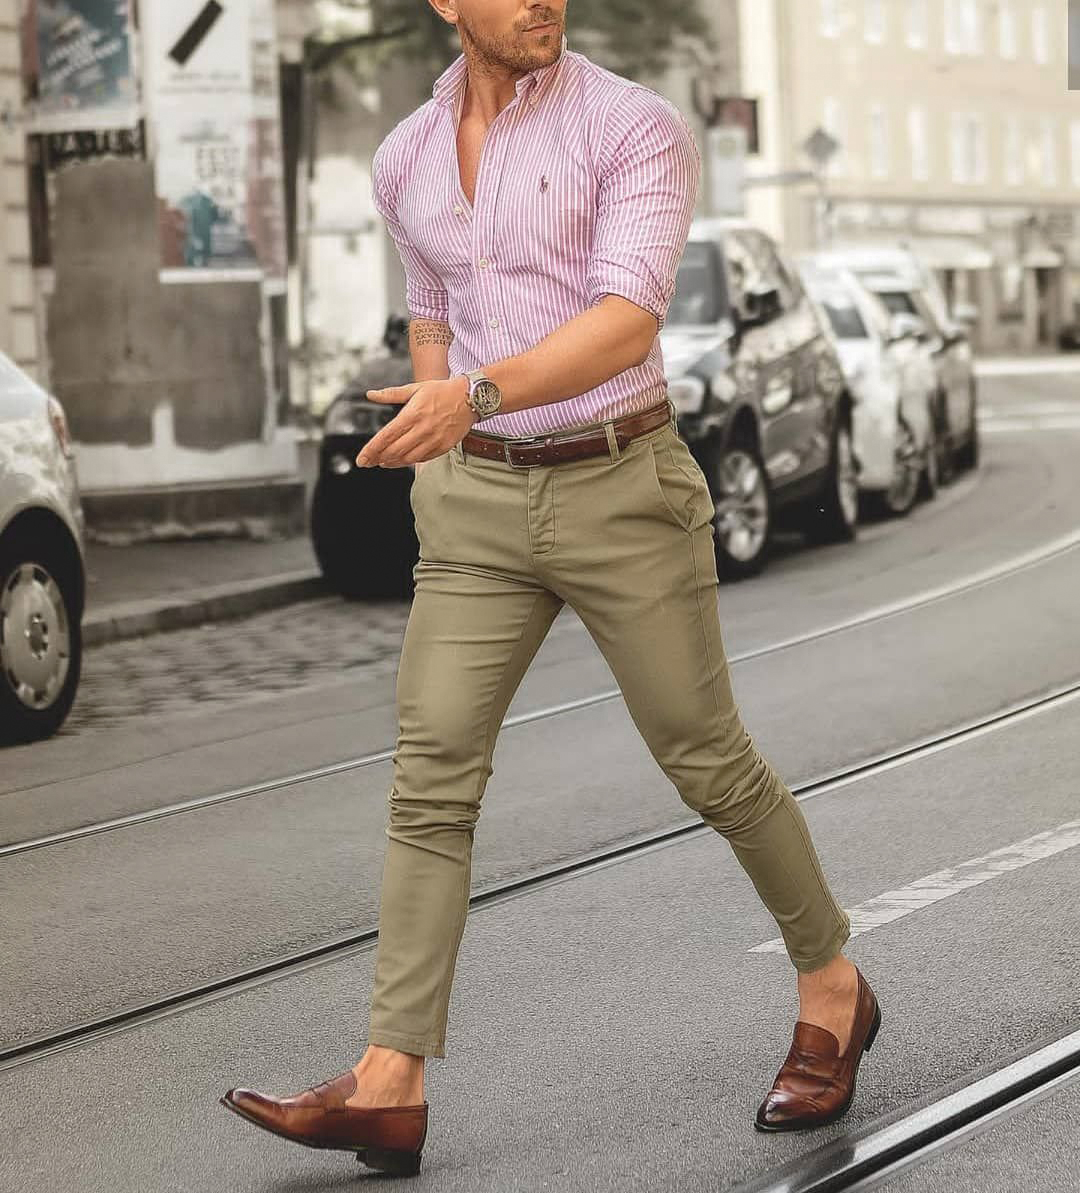 striped pink dress shirt with khaki pants and brown loafers